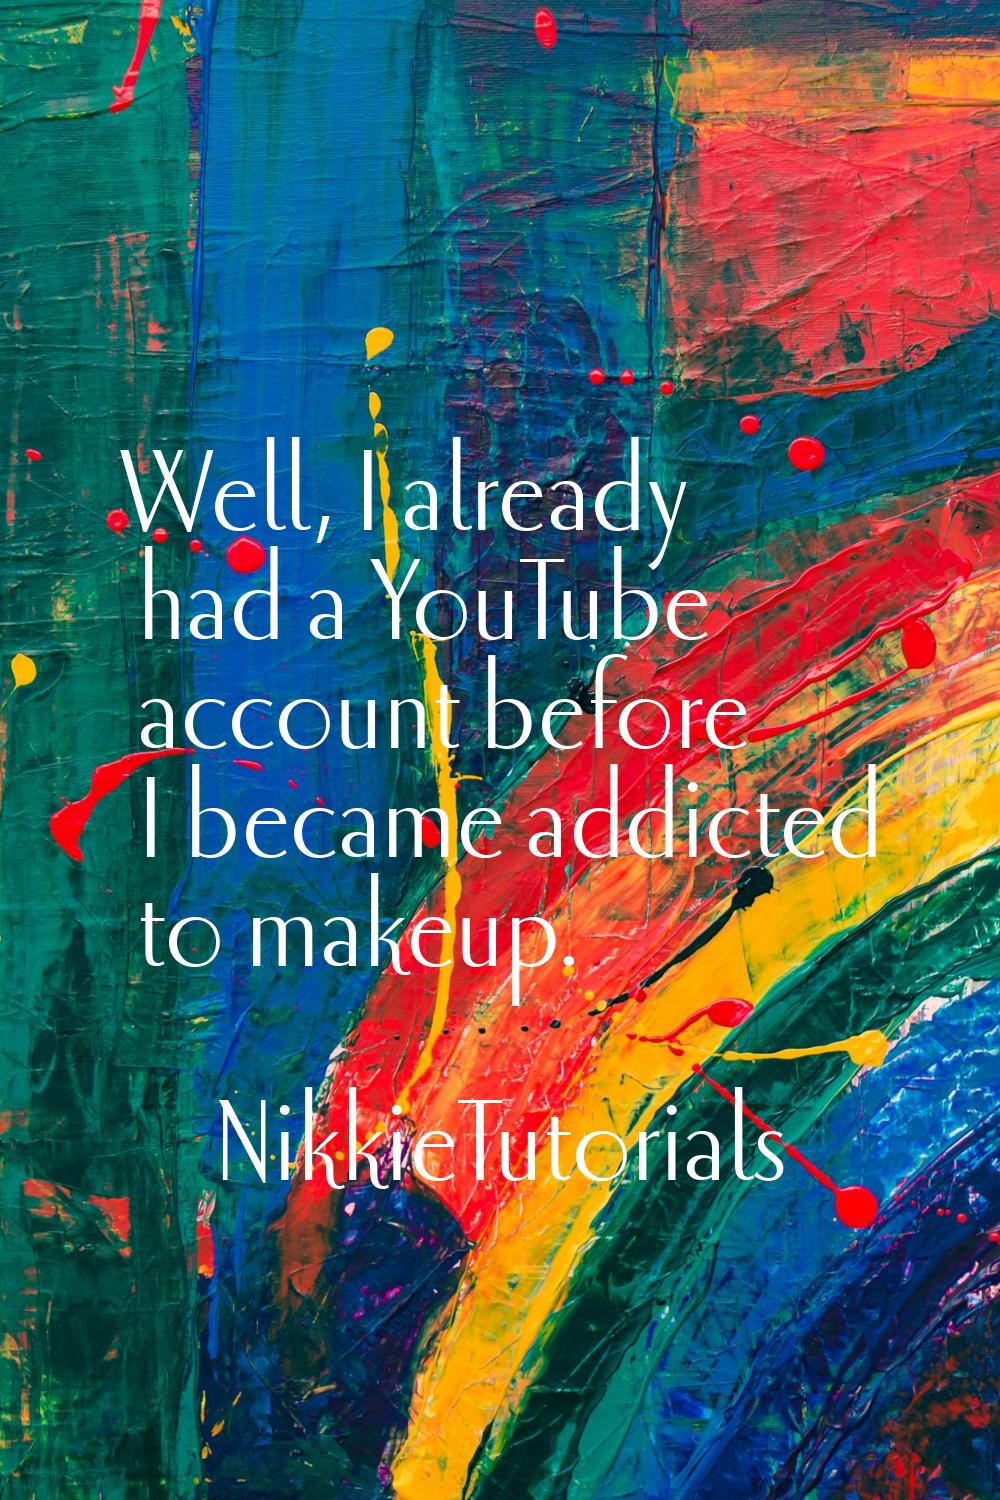 Well, I already had a YouTube account before I became addicted to makeup.